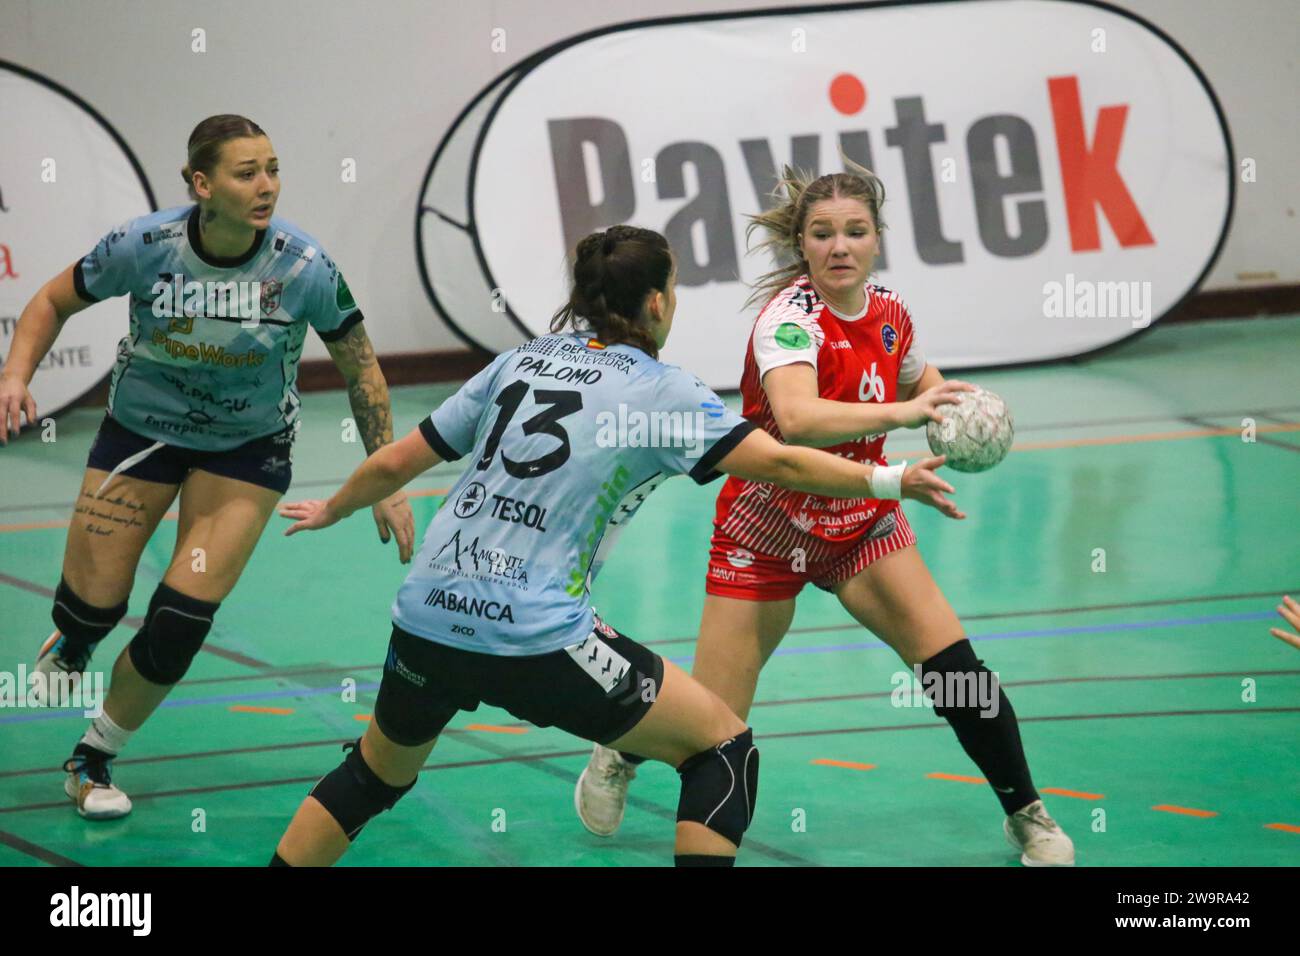 Gijon, Spain, 29th December, 2023: Motive.co Gijon Balonmano La Calzada player, Dorottya Margit Zentai (66, R) tries to get away from Maria Palomo (13, L) during the 13th matchday of the Liga Guerreras Iberdrola 2023- 24 between Motive.co Gijon Balonmano La Calzada and Mecalia Atletico Guardes, on December 29, 2023, at the La Arena Pavilion, in Gijon, Spain. Credit: Alberto Brevers / Alamy Live News. Stock Photo